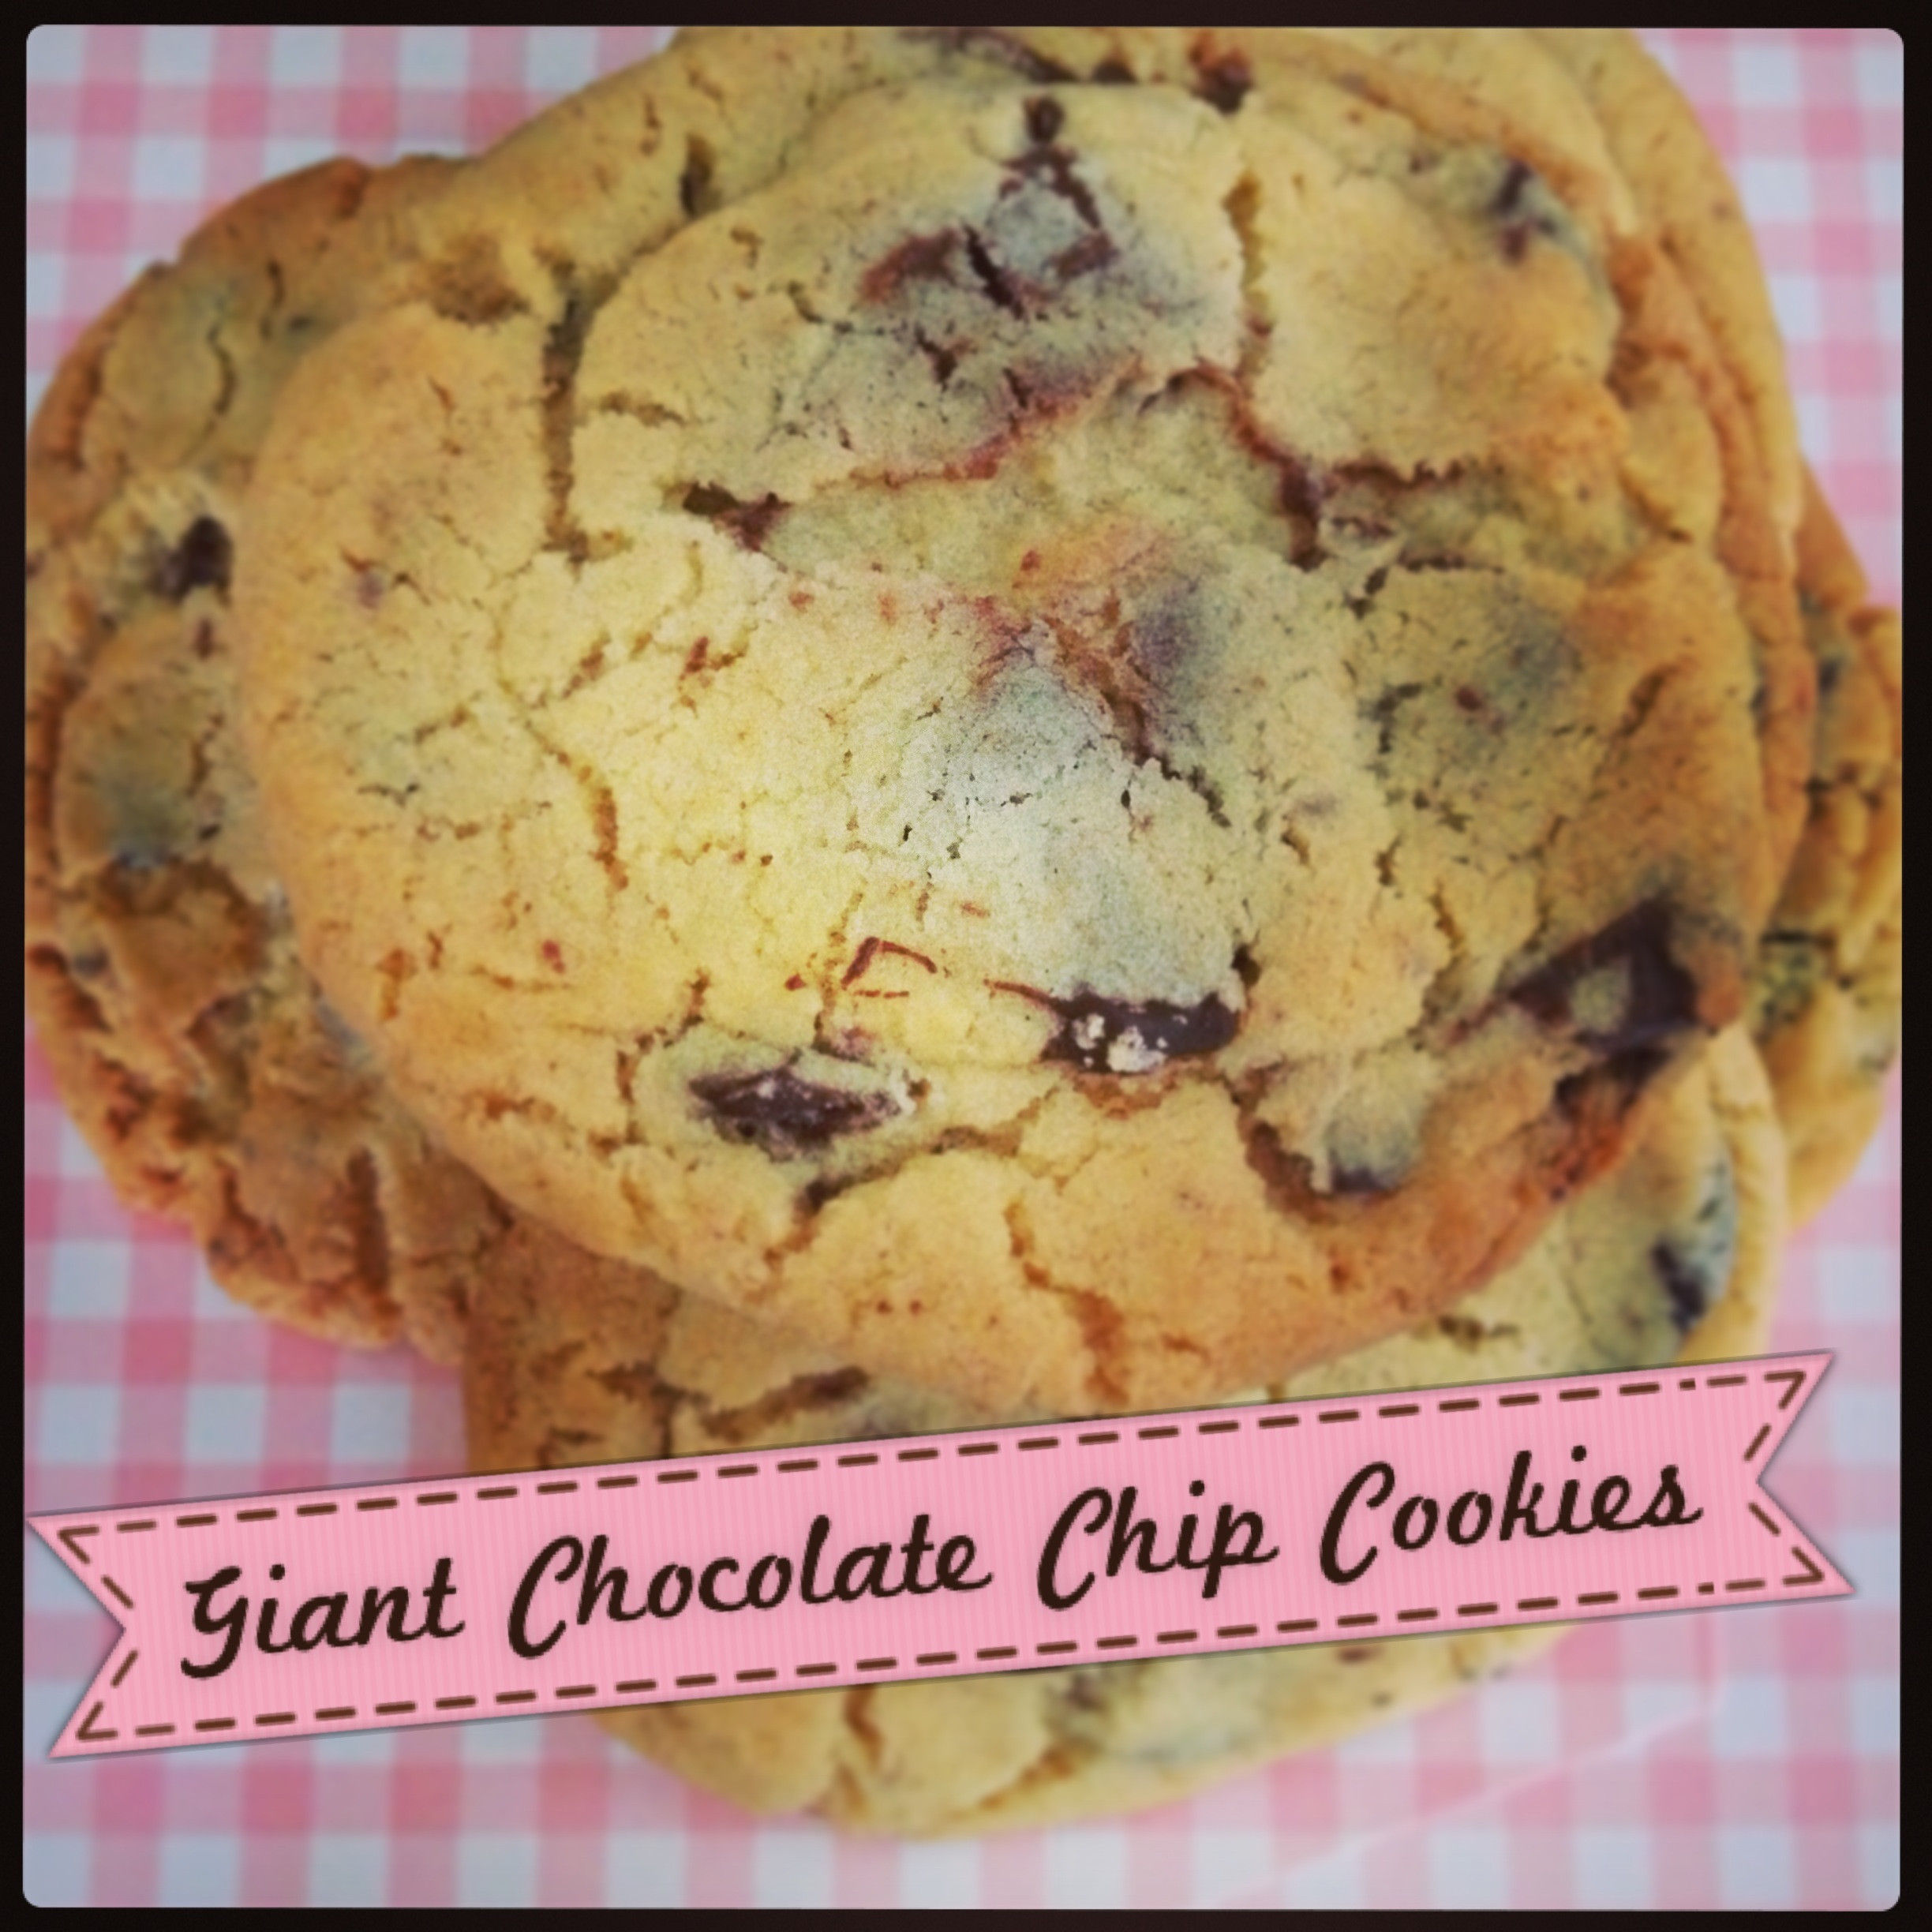 Biggest Chocolate Chip Cookies
 Giant Chocolate Chip Cookies